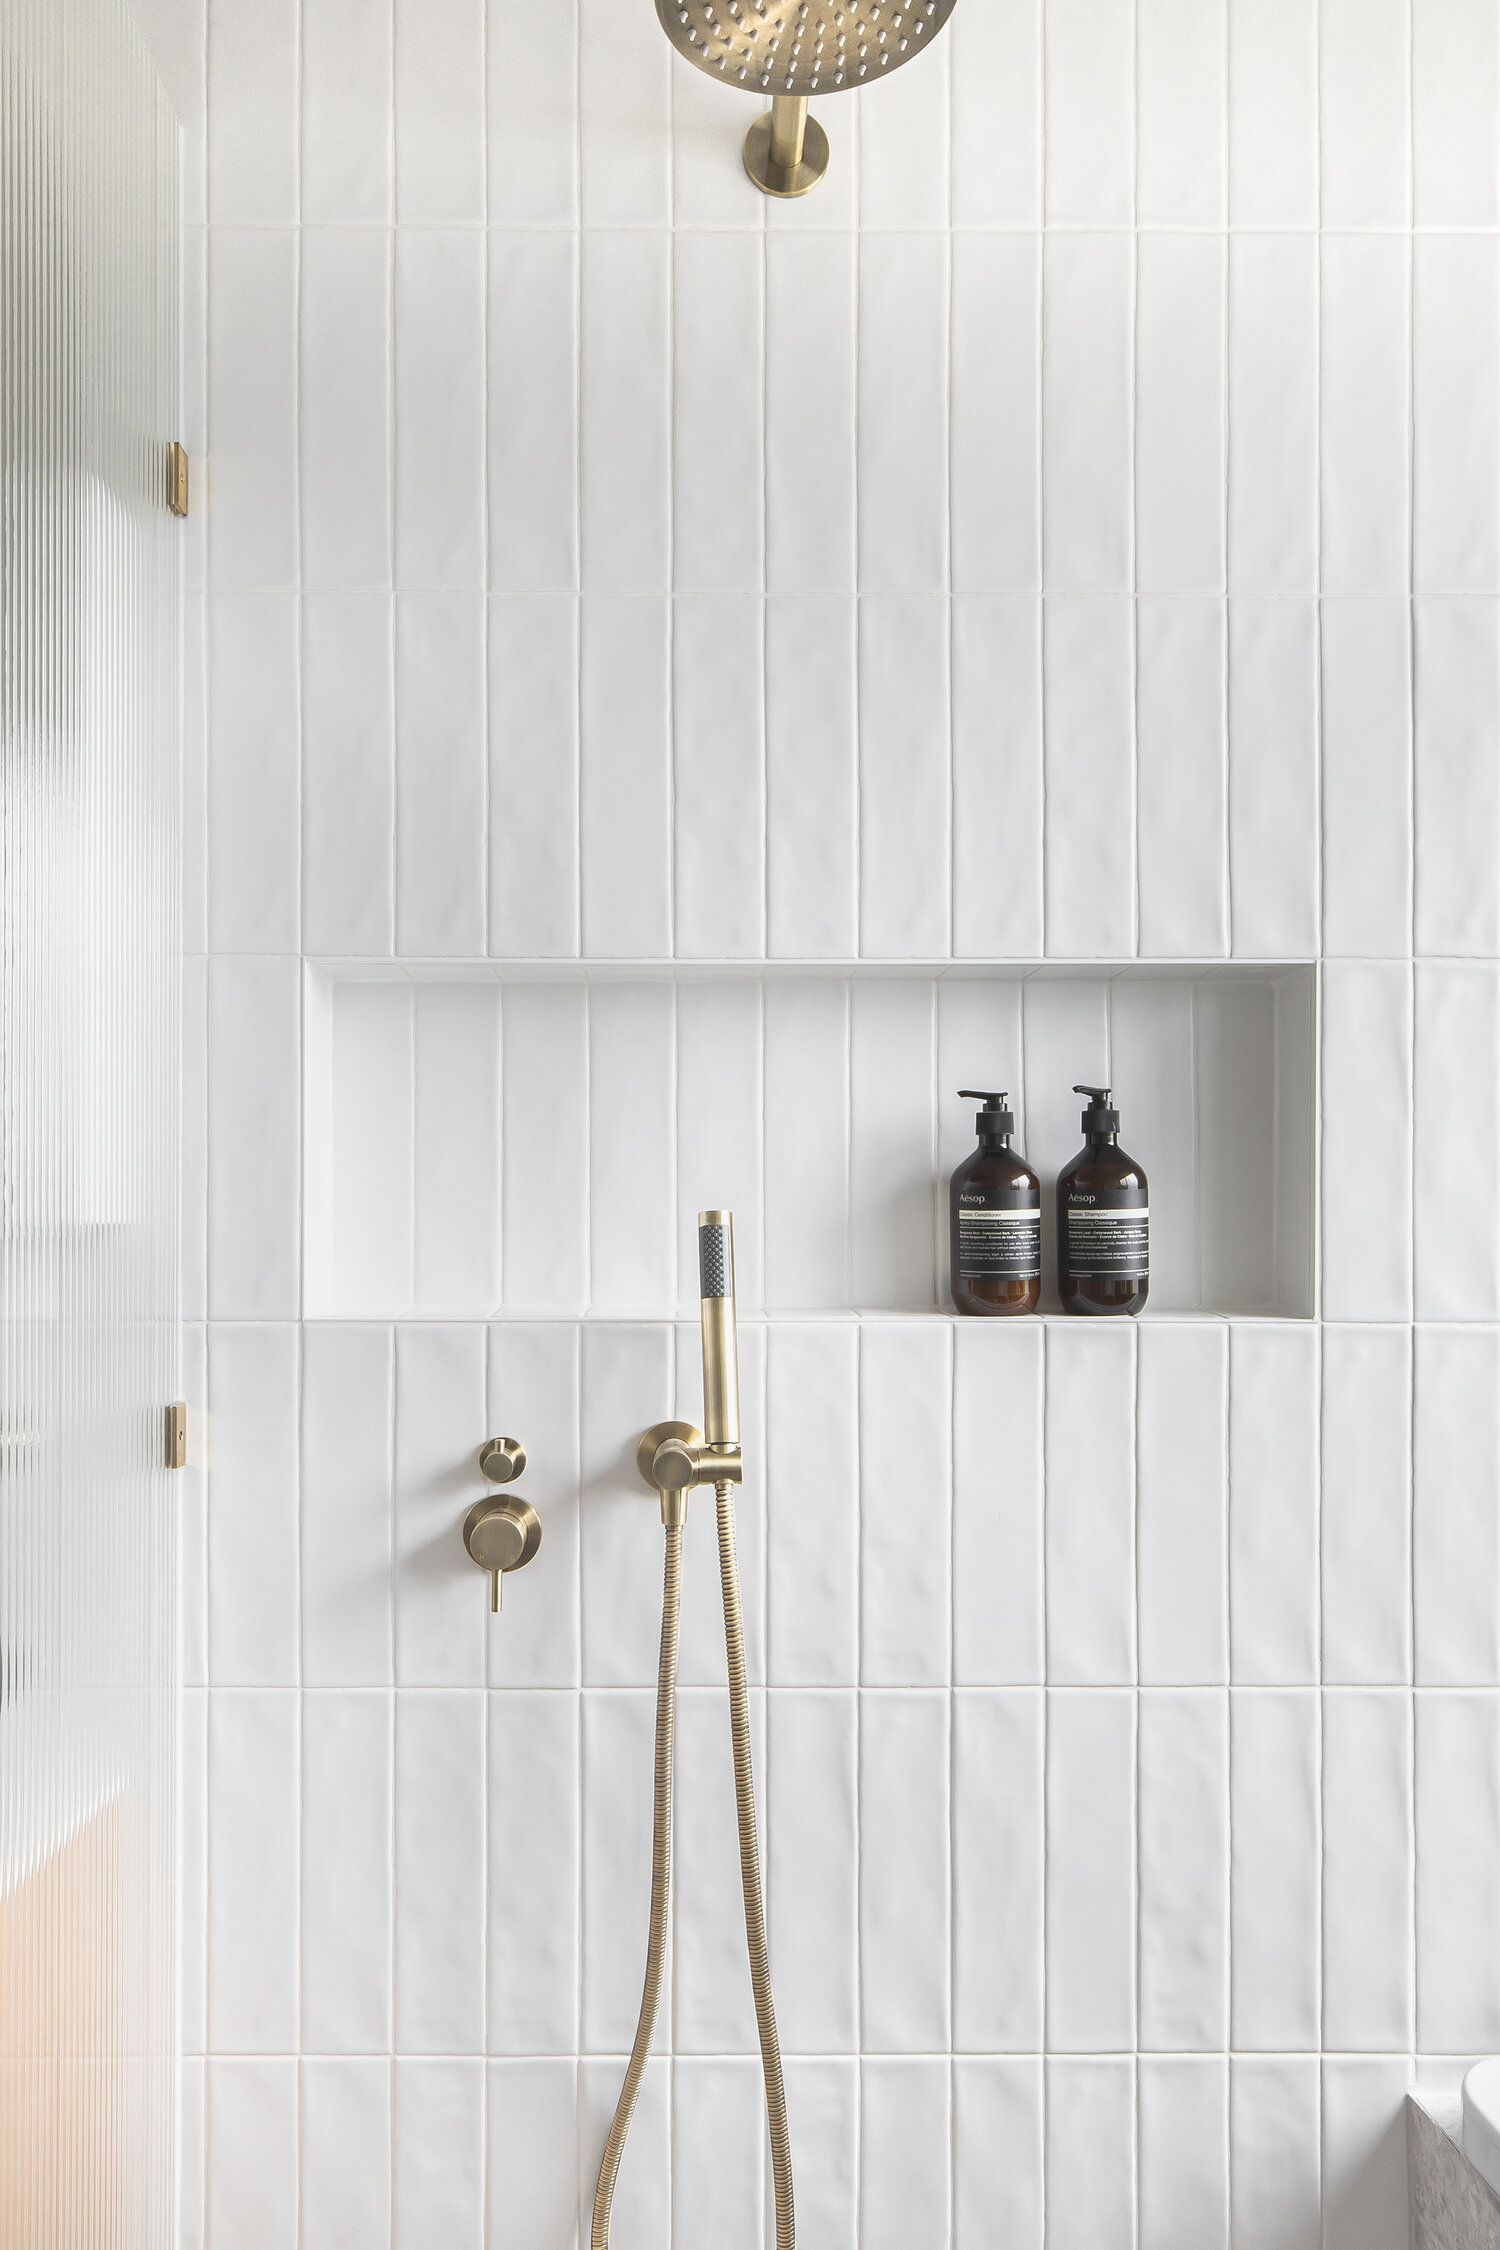 Bathroom Showers: Stylish and Functional Fixtures for Your Bathroom